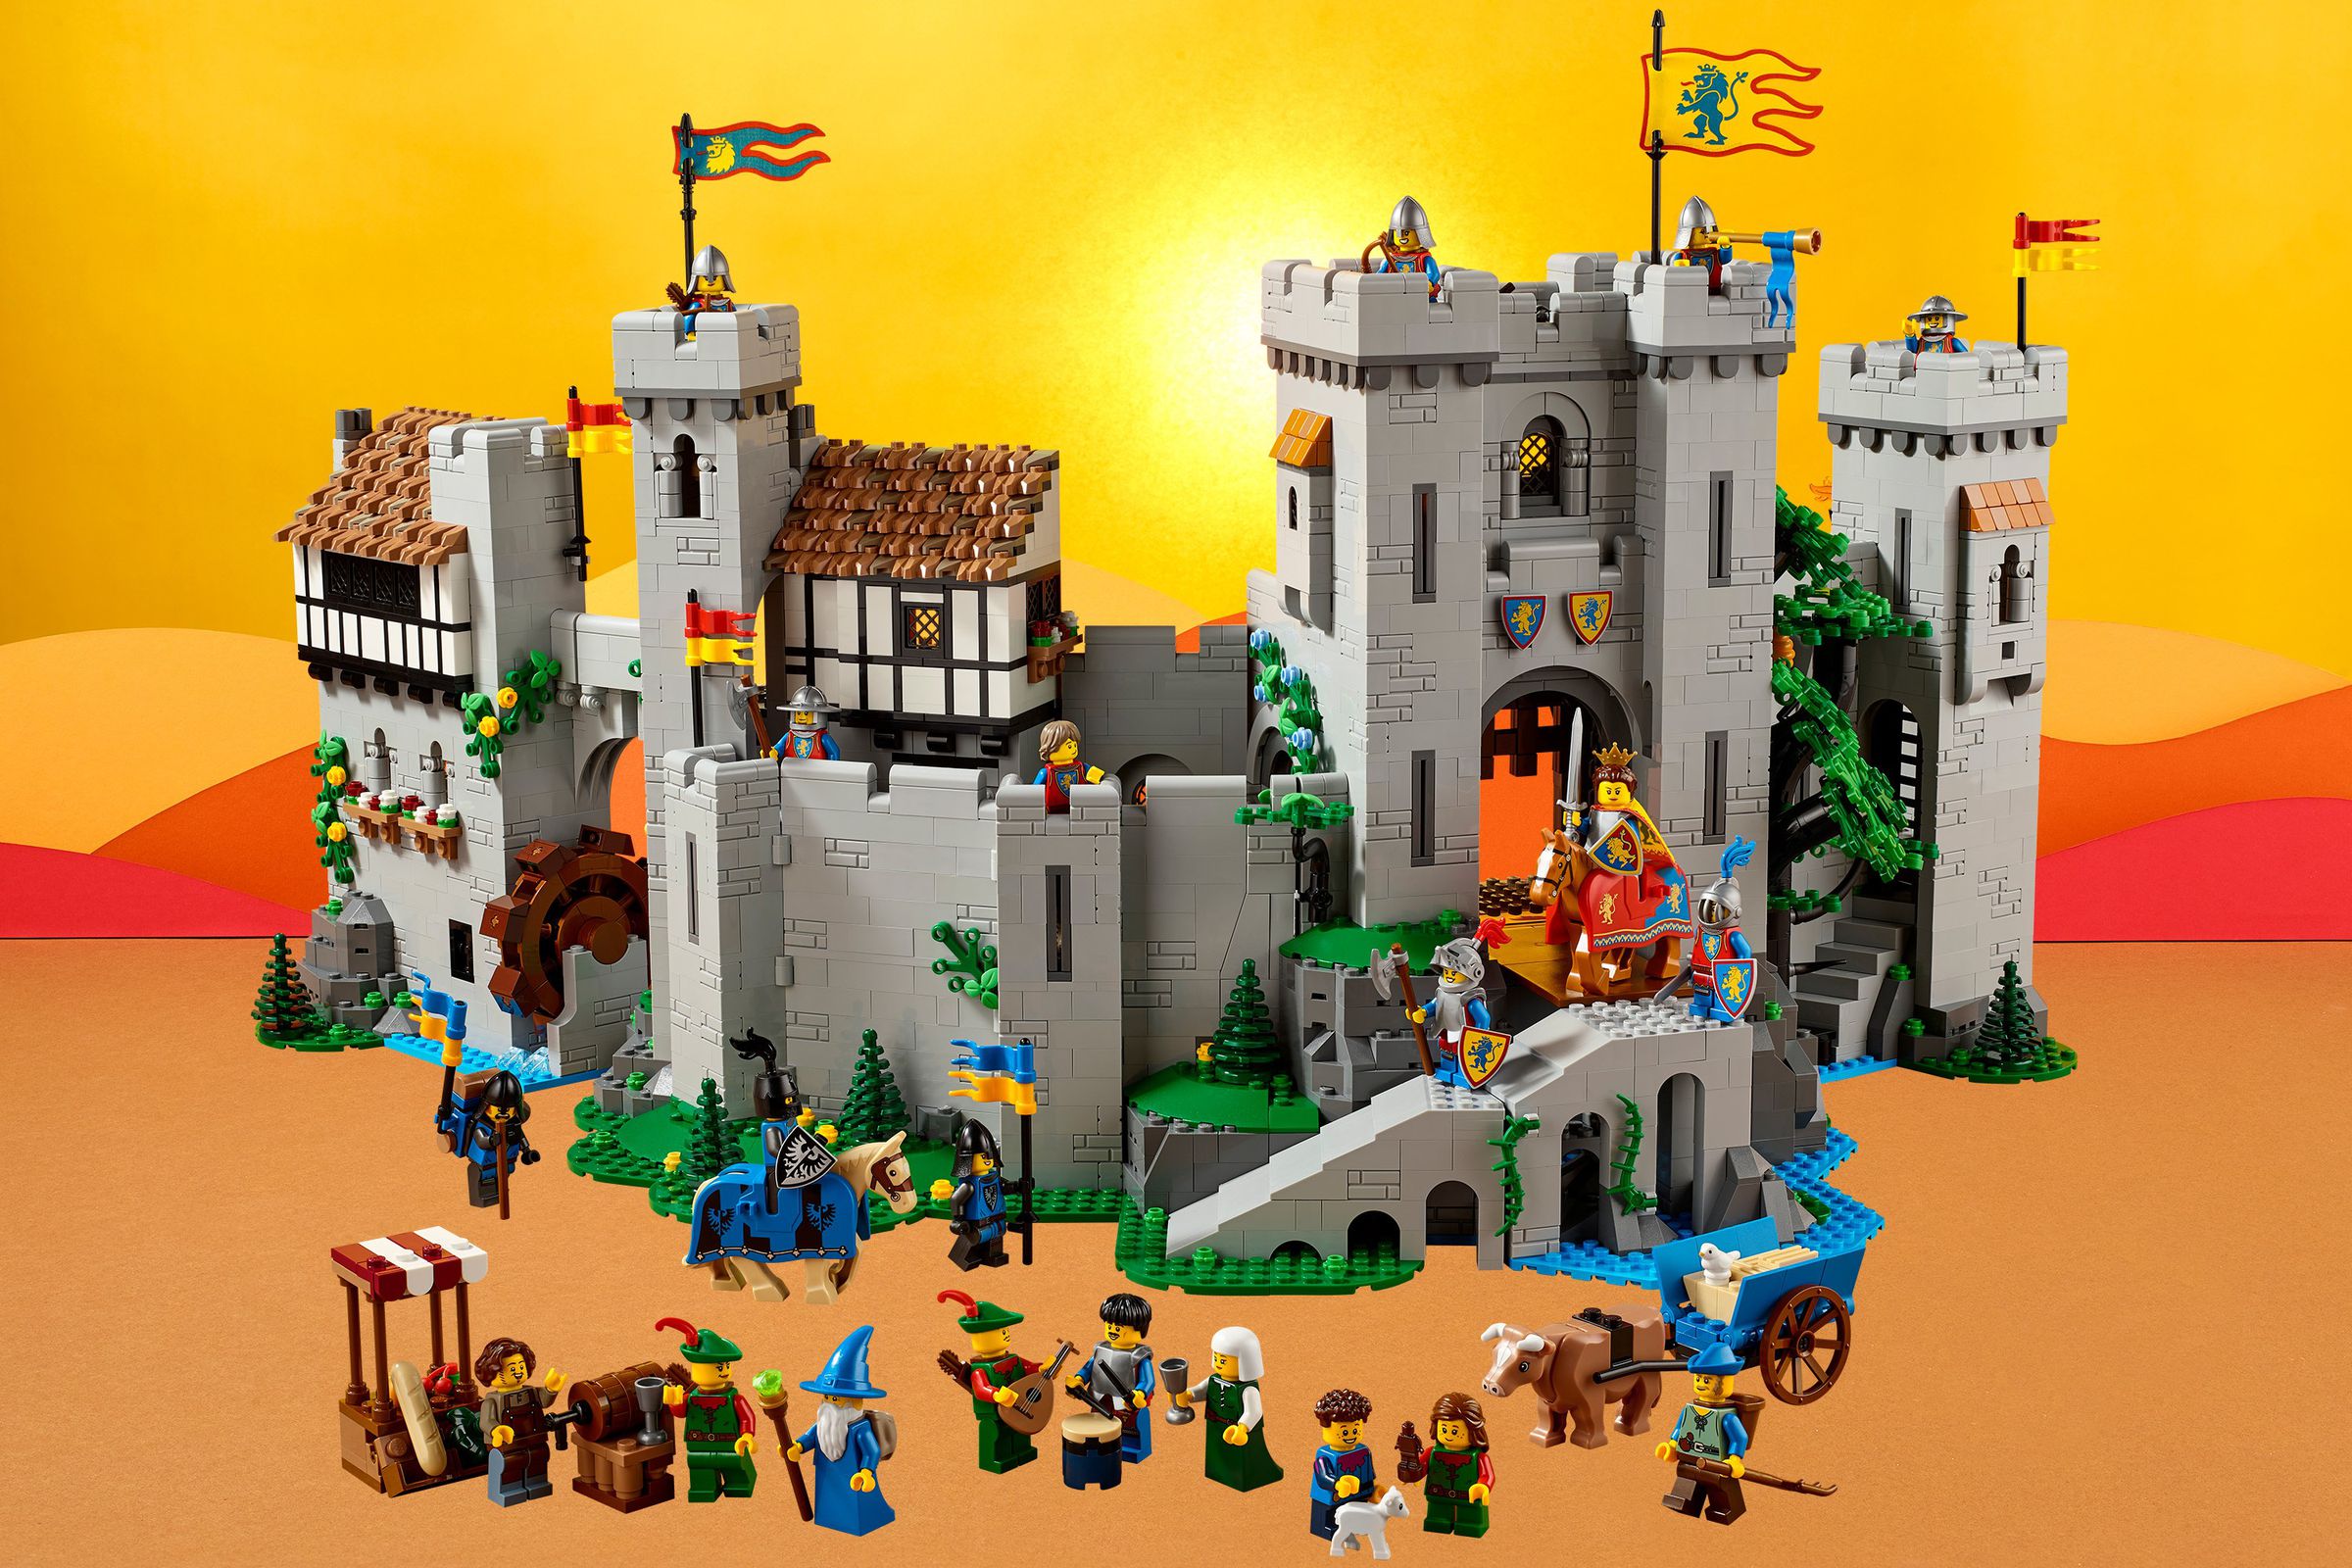 For more about Lego’s new castle instead, tap here.